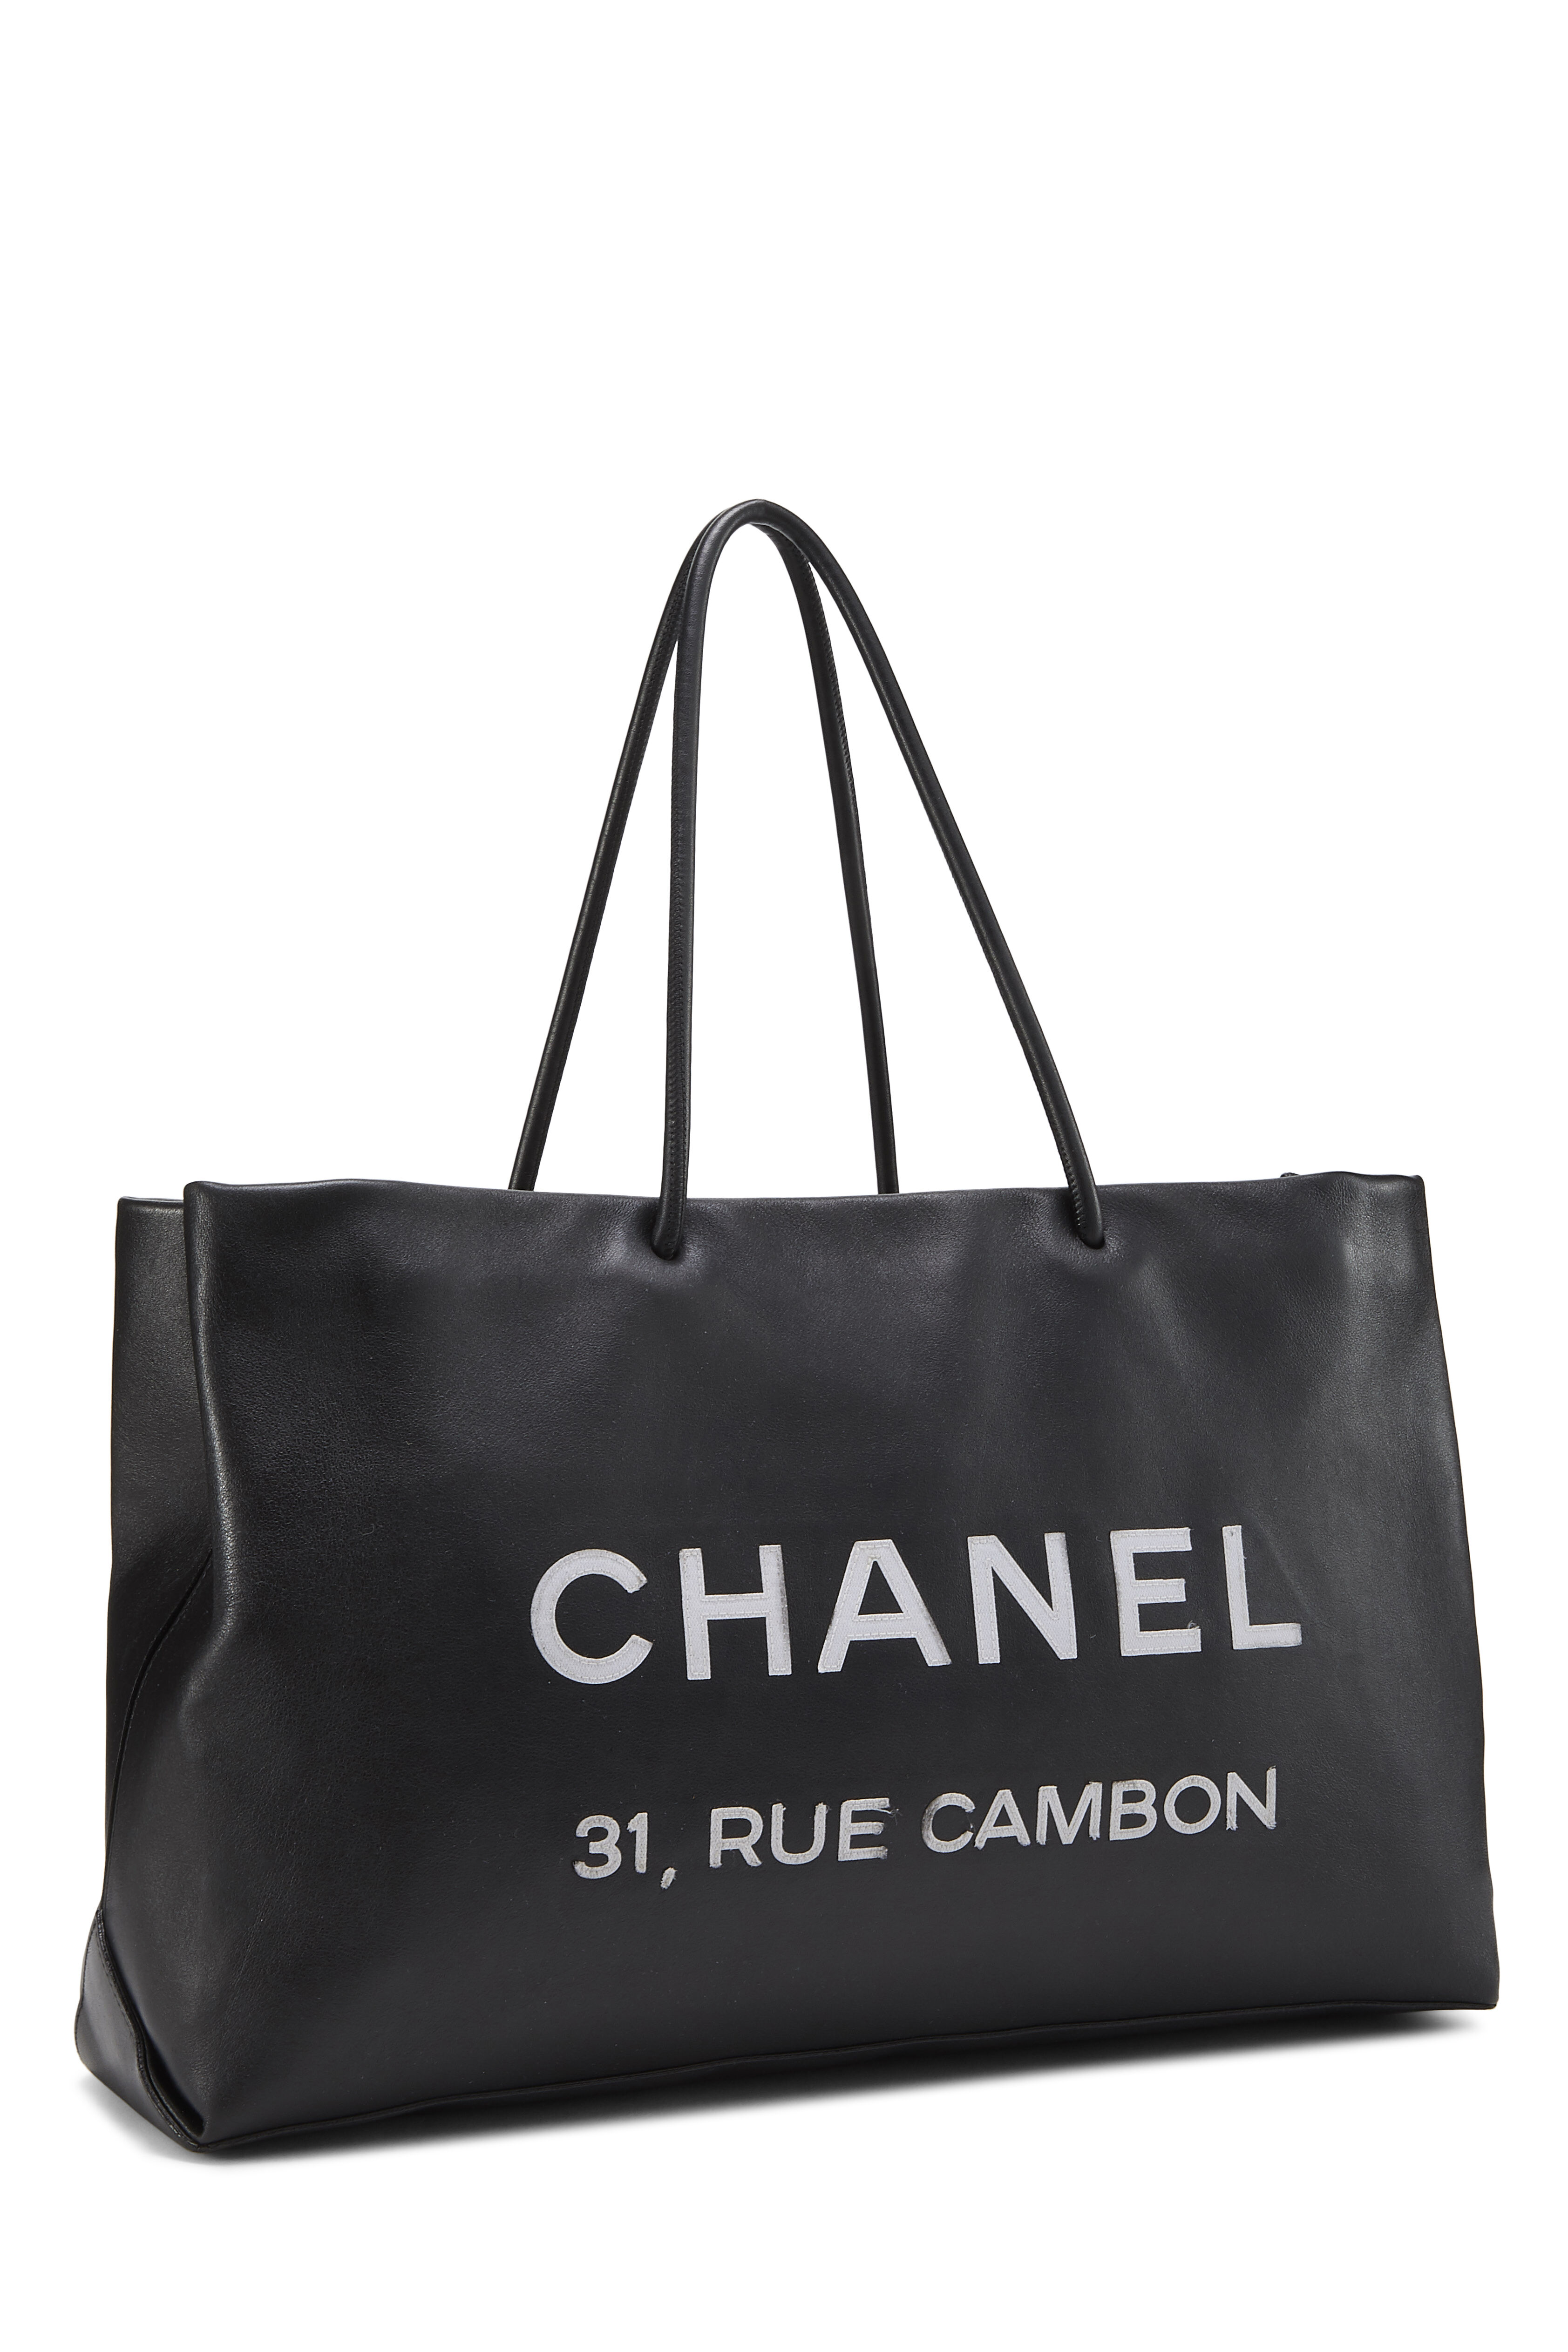 Chanel Cambon - 76 For Sale on 1stDibs  chanel cambon ligne tote, chanel  ligne cambon tote, chanel cambon bag price